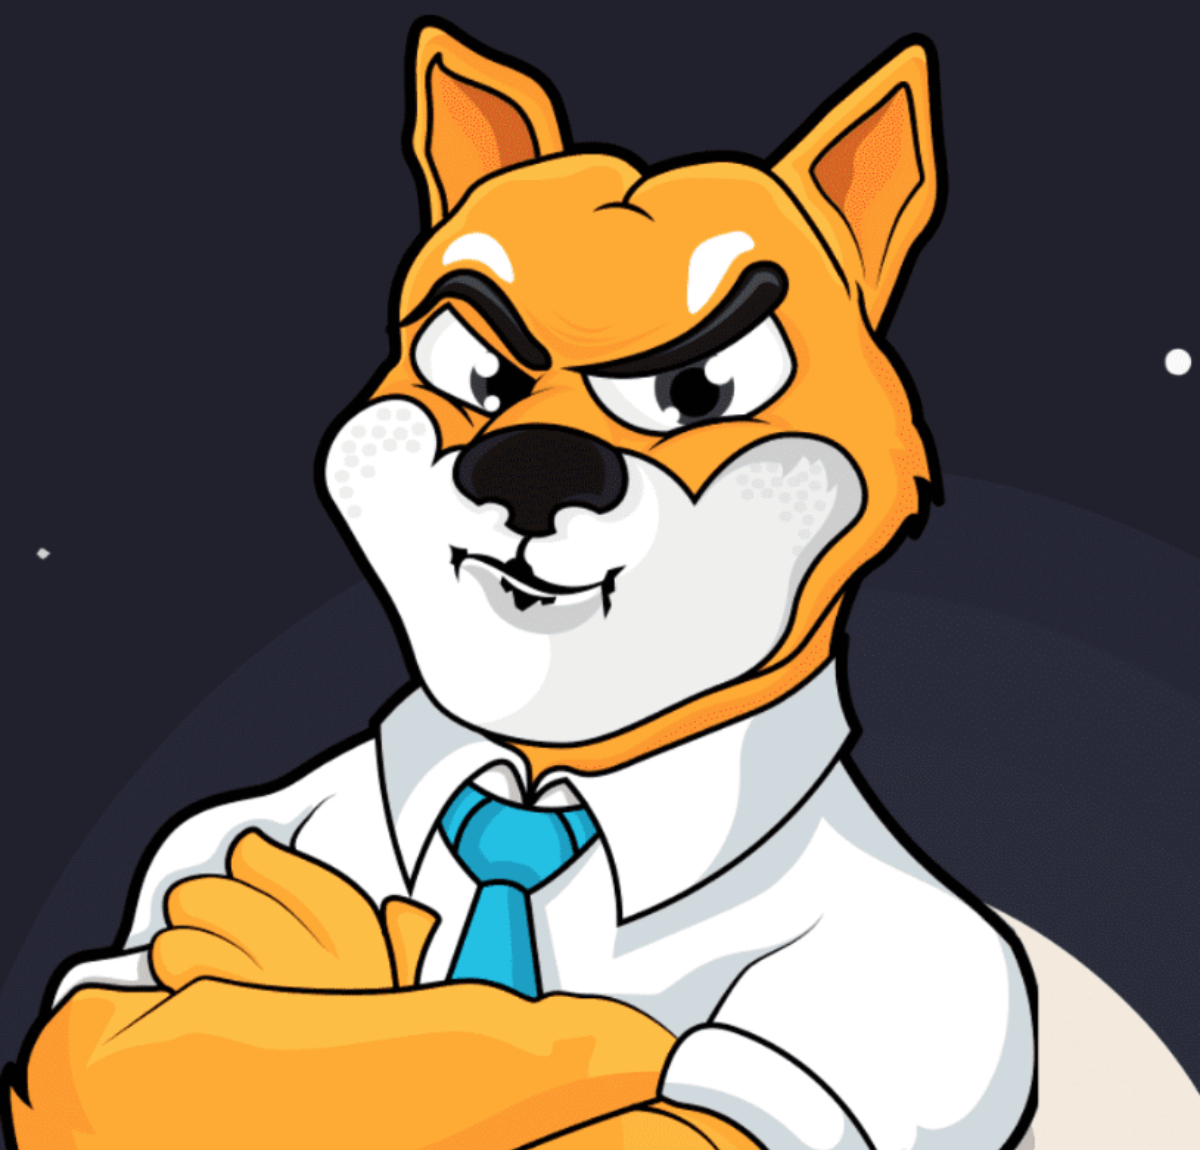 Shiba Inu has amassed more than 30,000 new investors over the last 30 days